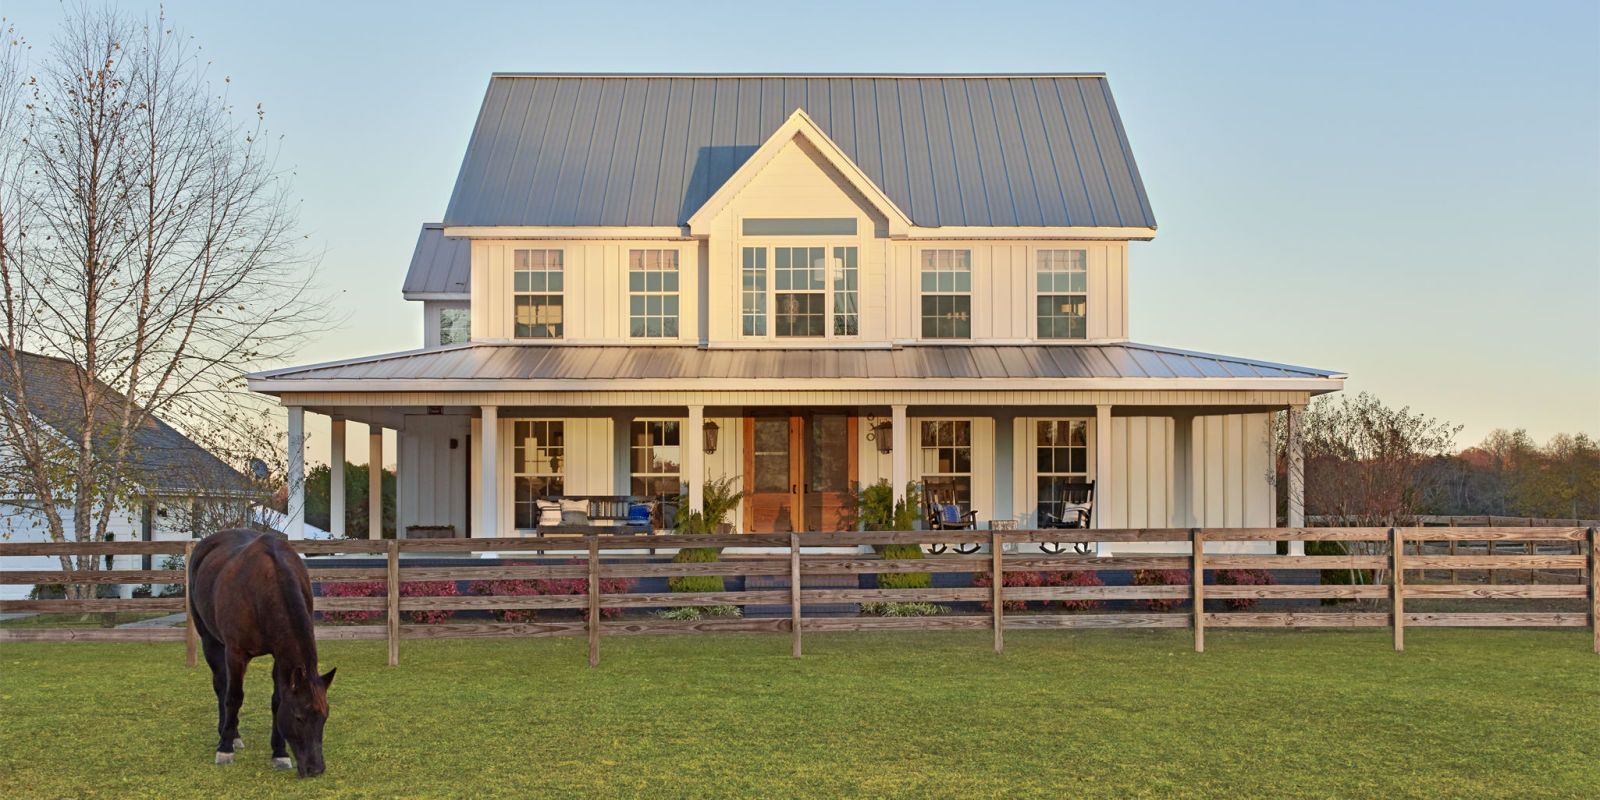 This Couple Turned an Old Farmhouse Into a Stunning Country Home